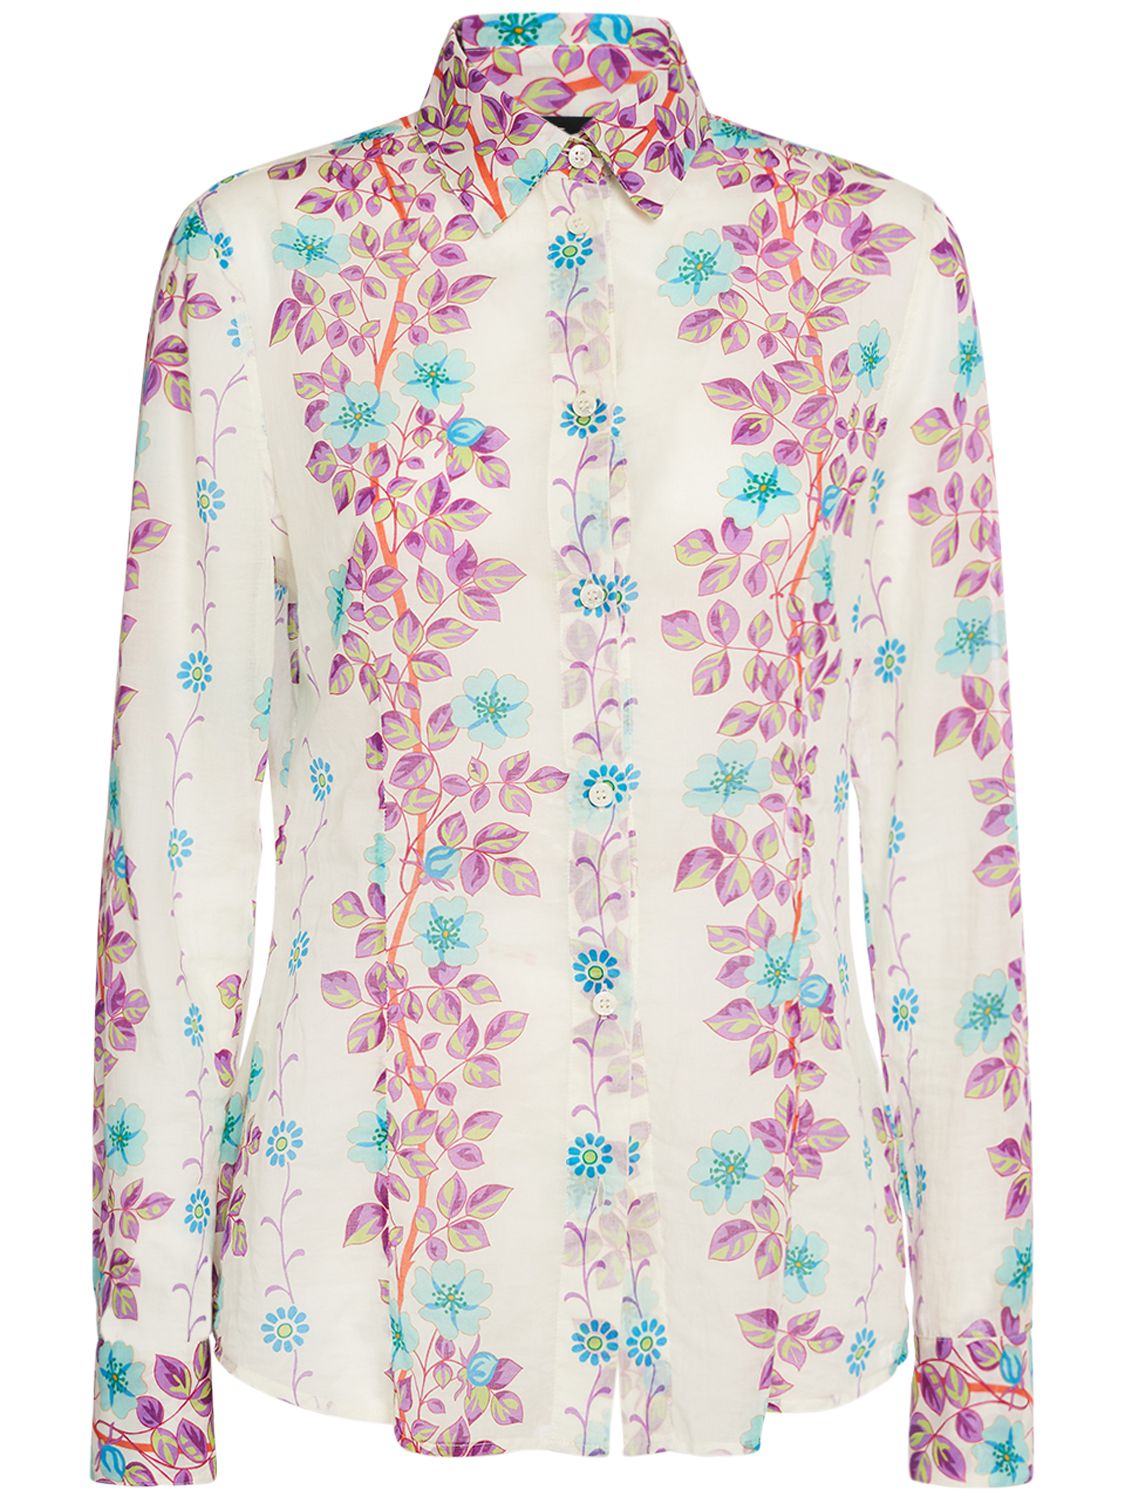 Floral Printed Cotton Long Sleeve Shirt